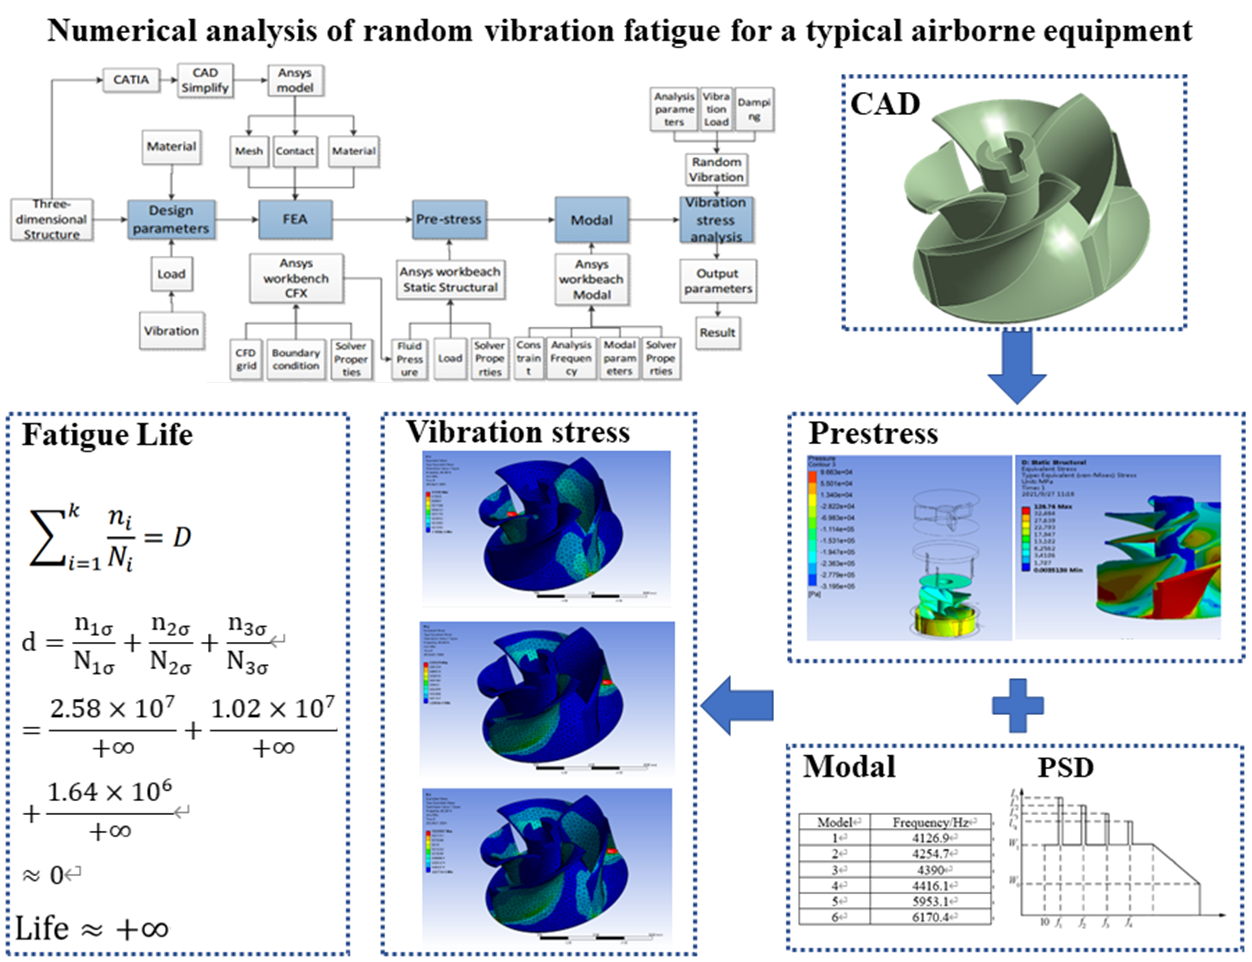 Numerical analysis of random vibration fatigue for a typical airborne equipment